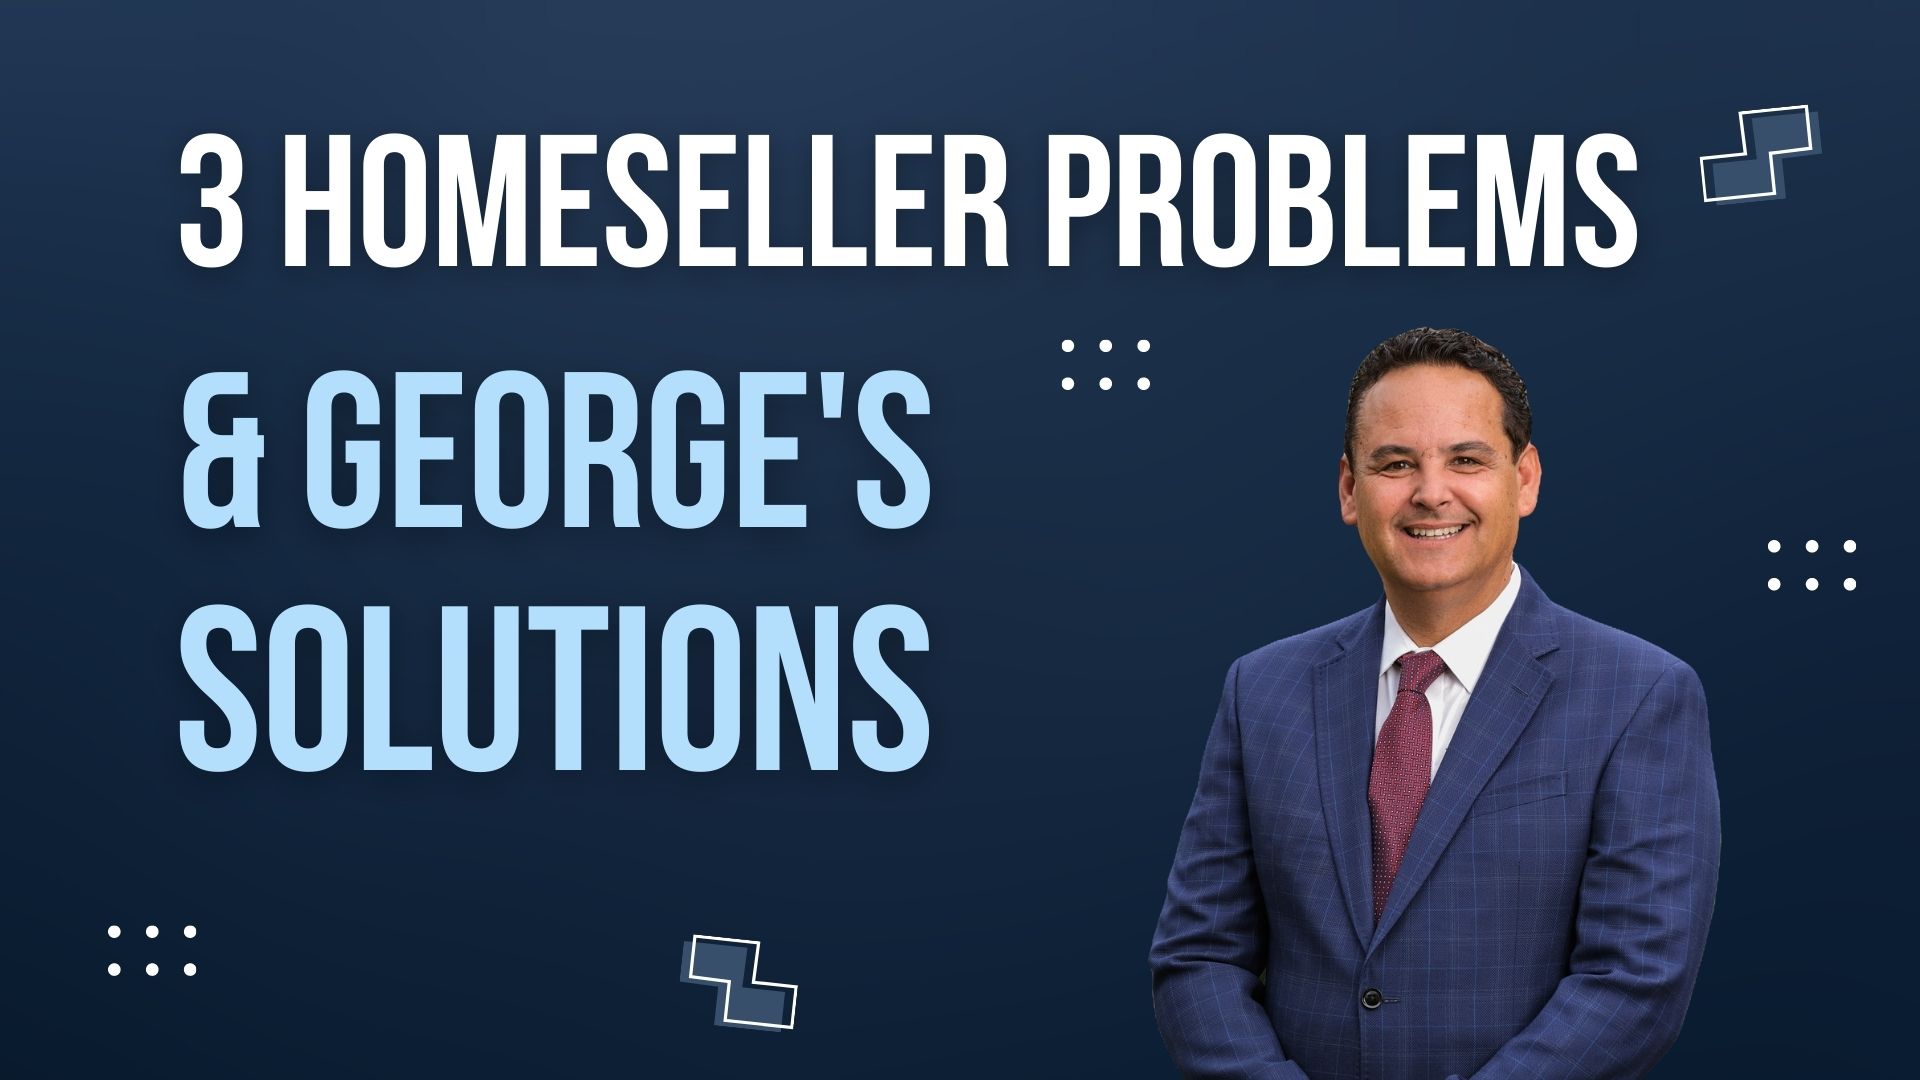 3 Homeseller Problems and the Solutions